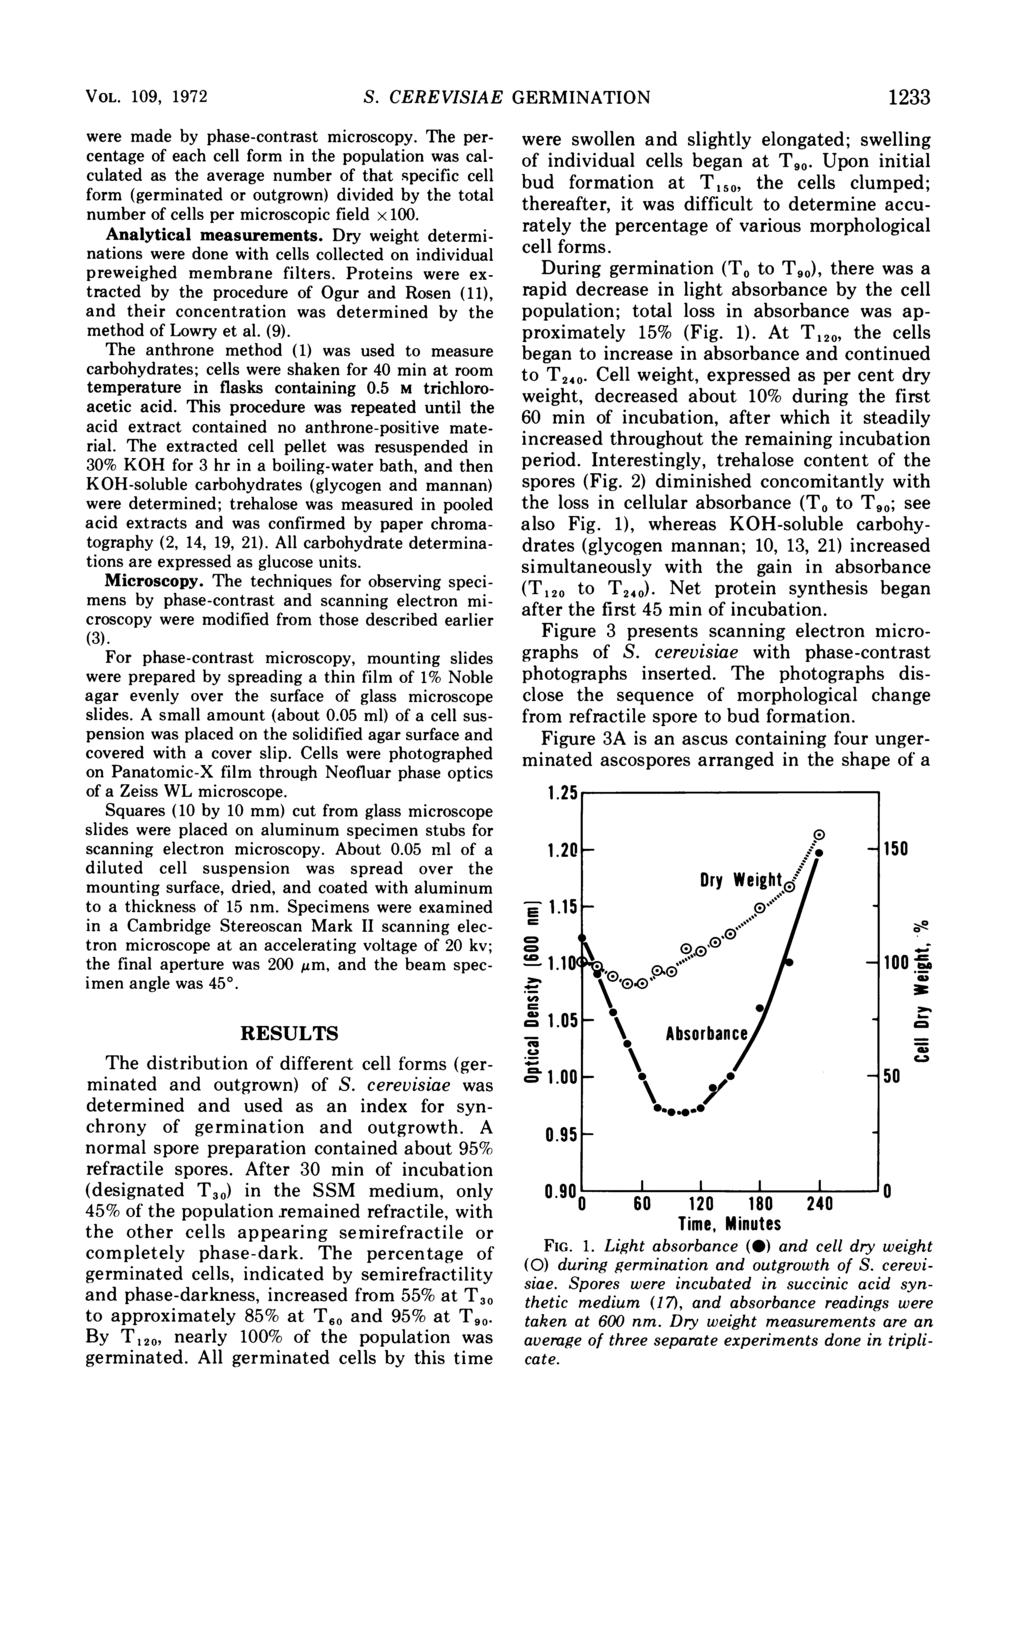 VOL. 109, 1972 S. CEREVISIAE GERMINATION 1233 were made by phase-contrast microscopy.